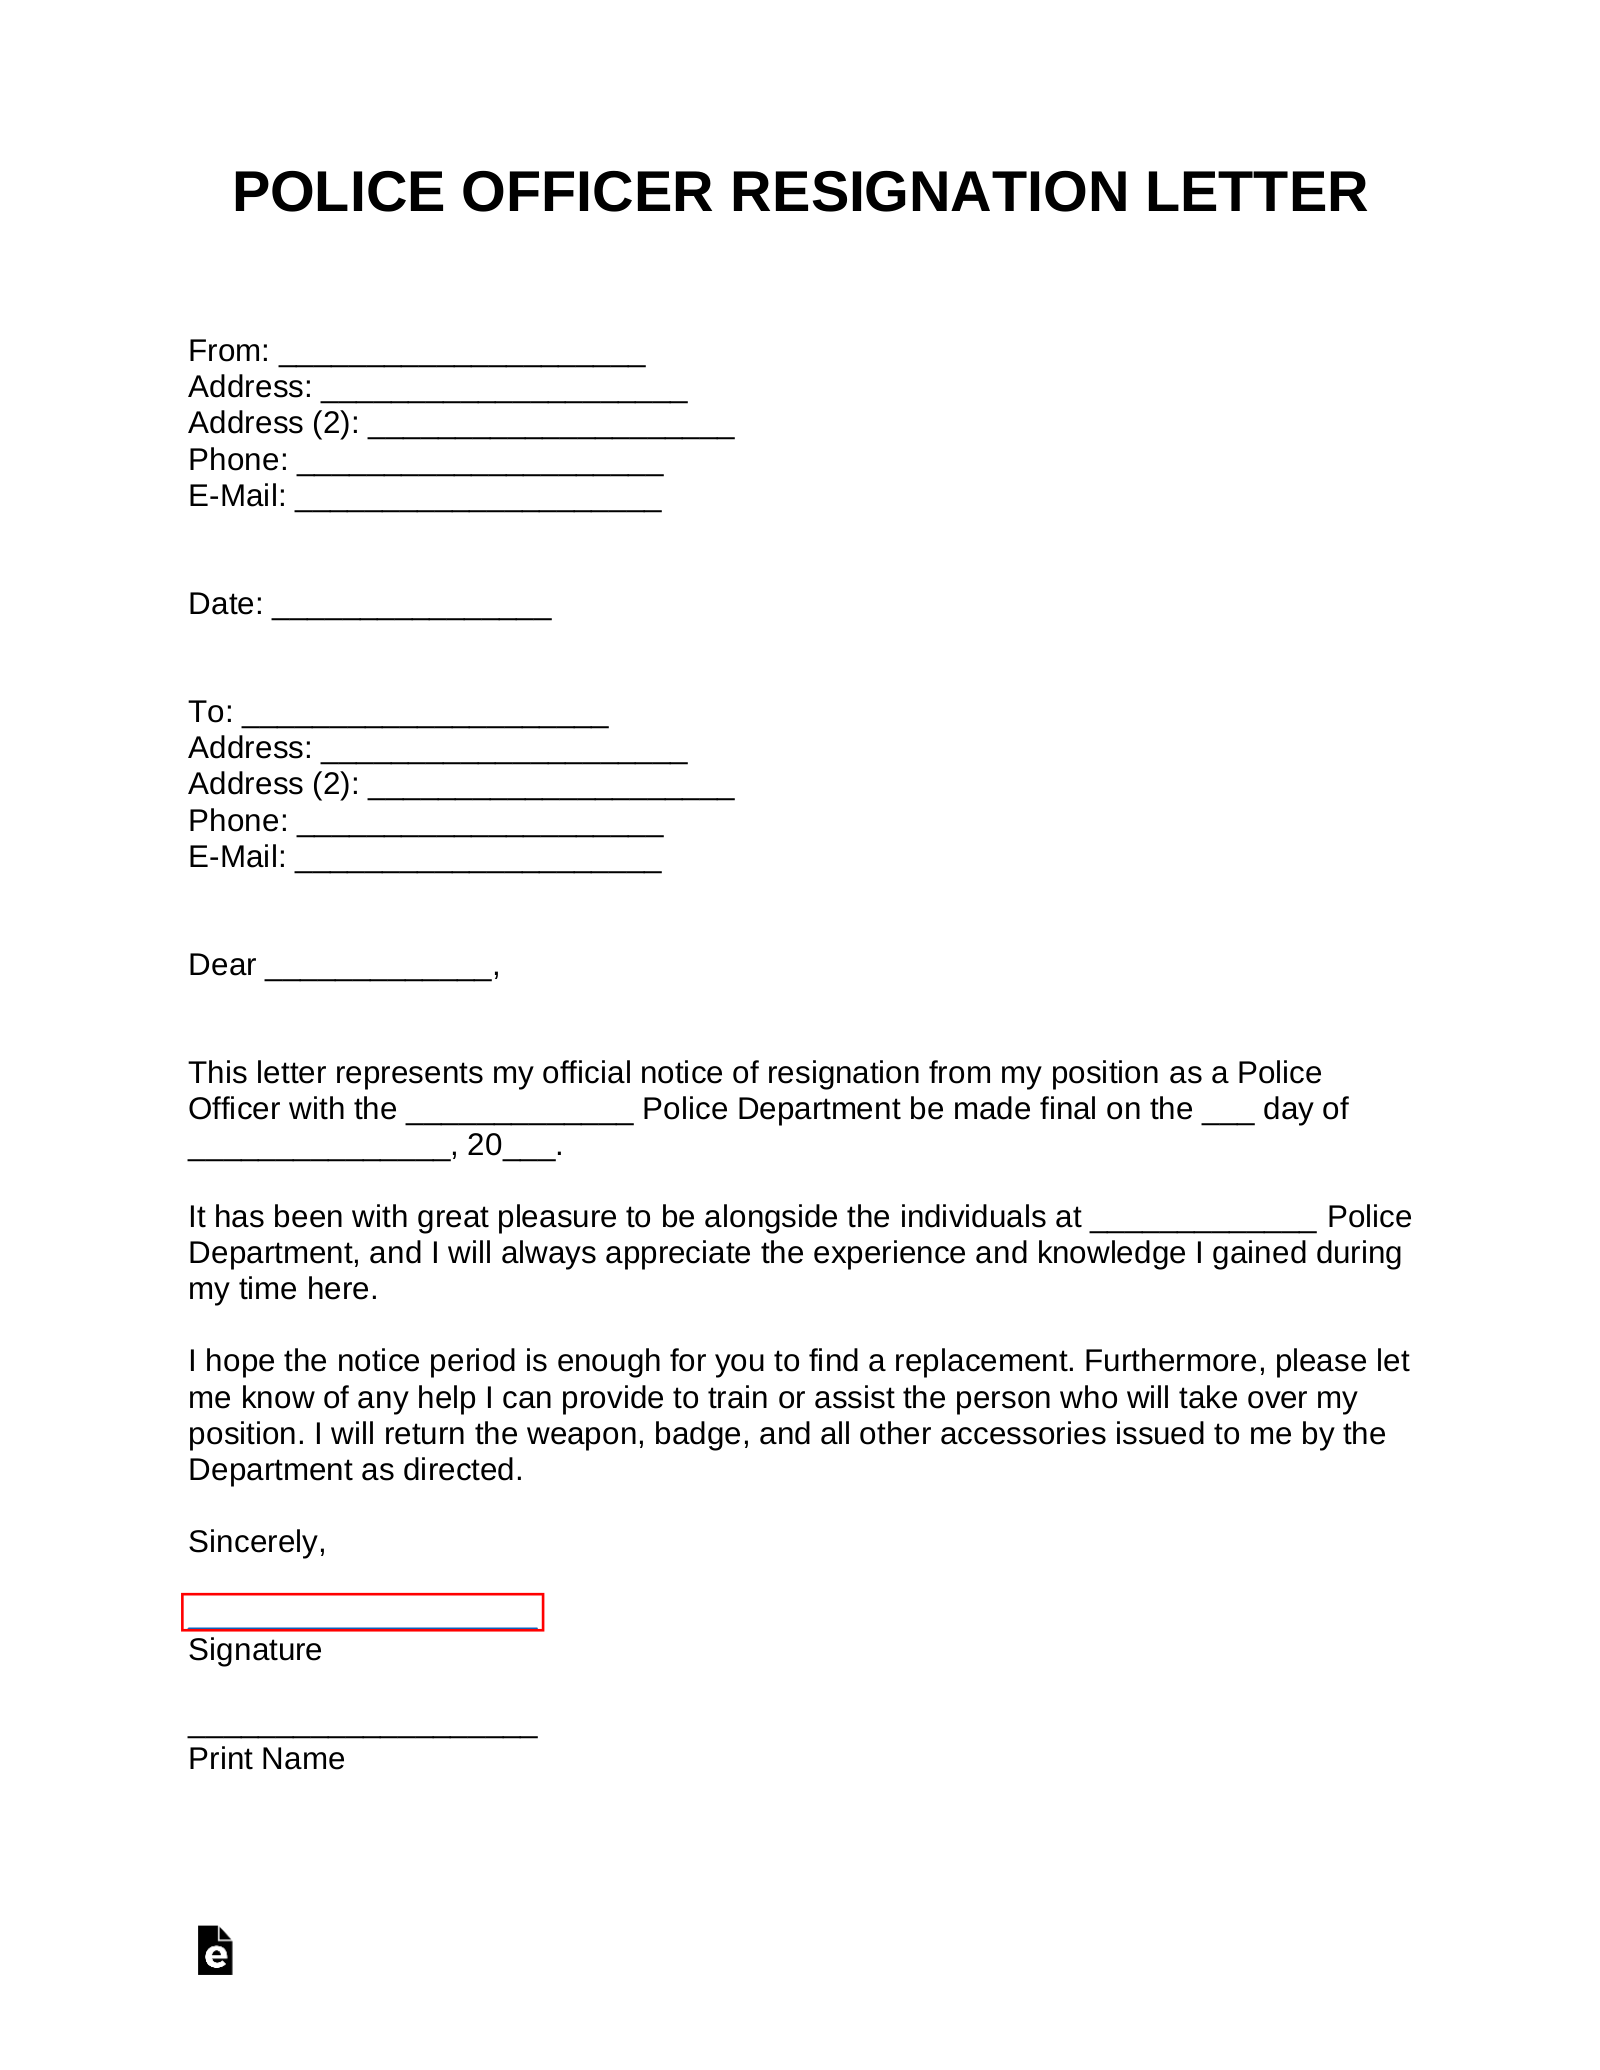 Police Officer Resignation Letter Template – with Samples